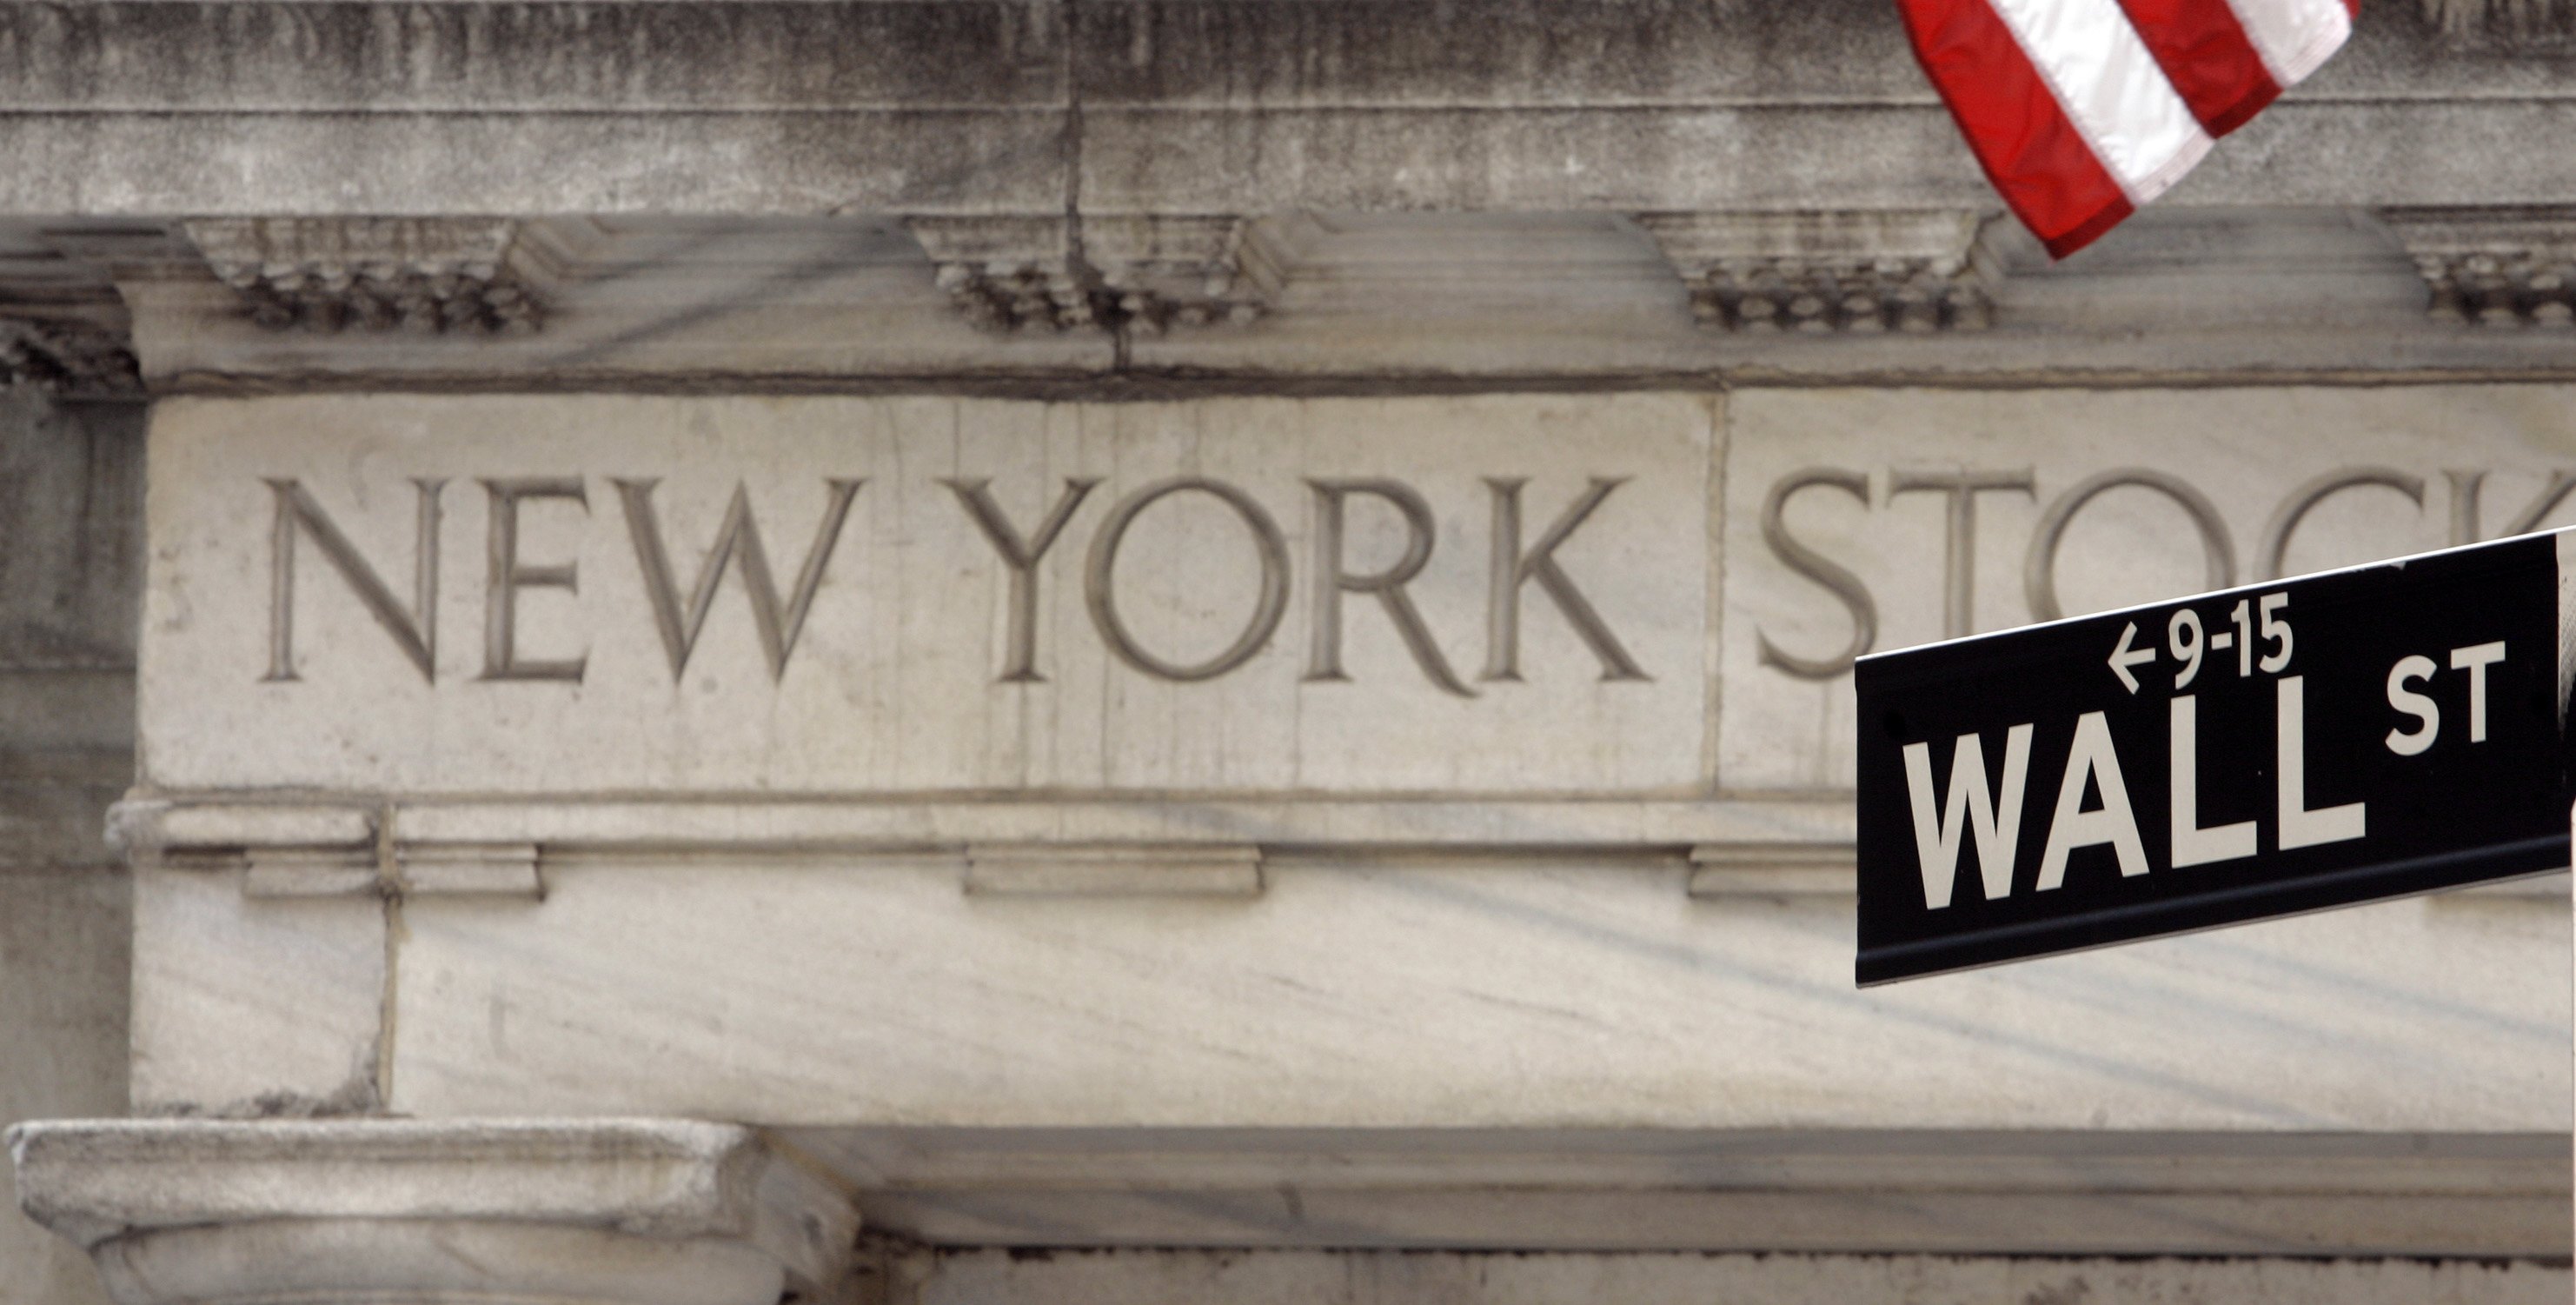 A Wall Street sign is seen at an entrance to the New York Stock Exchange. (AP Photo/Richard Drew, File)